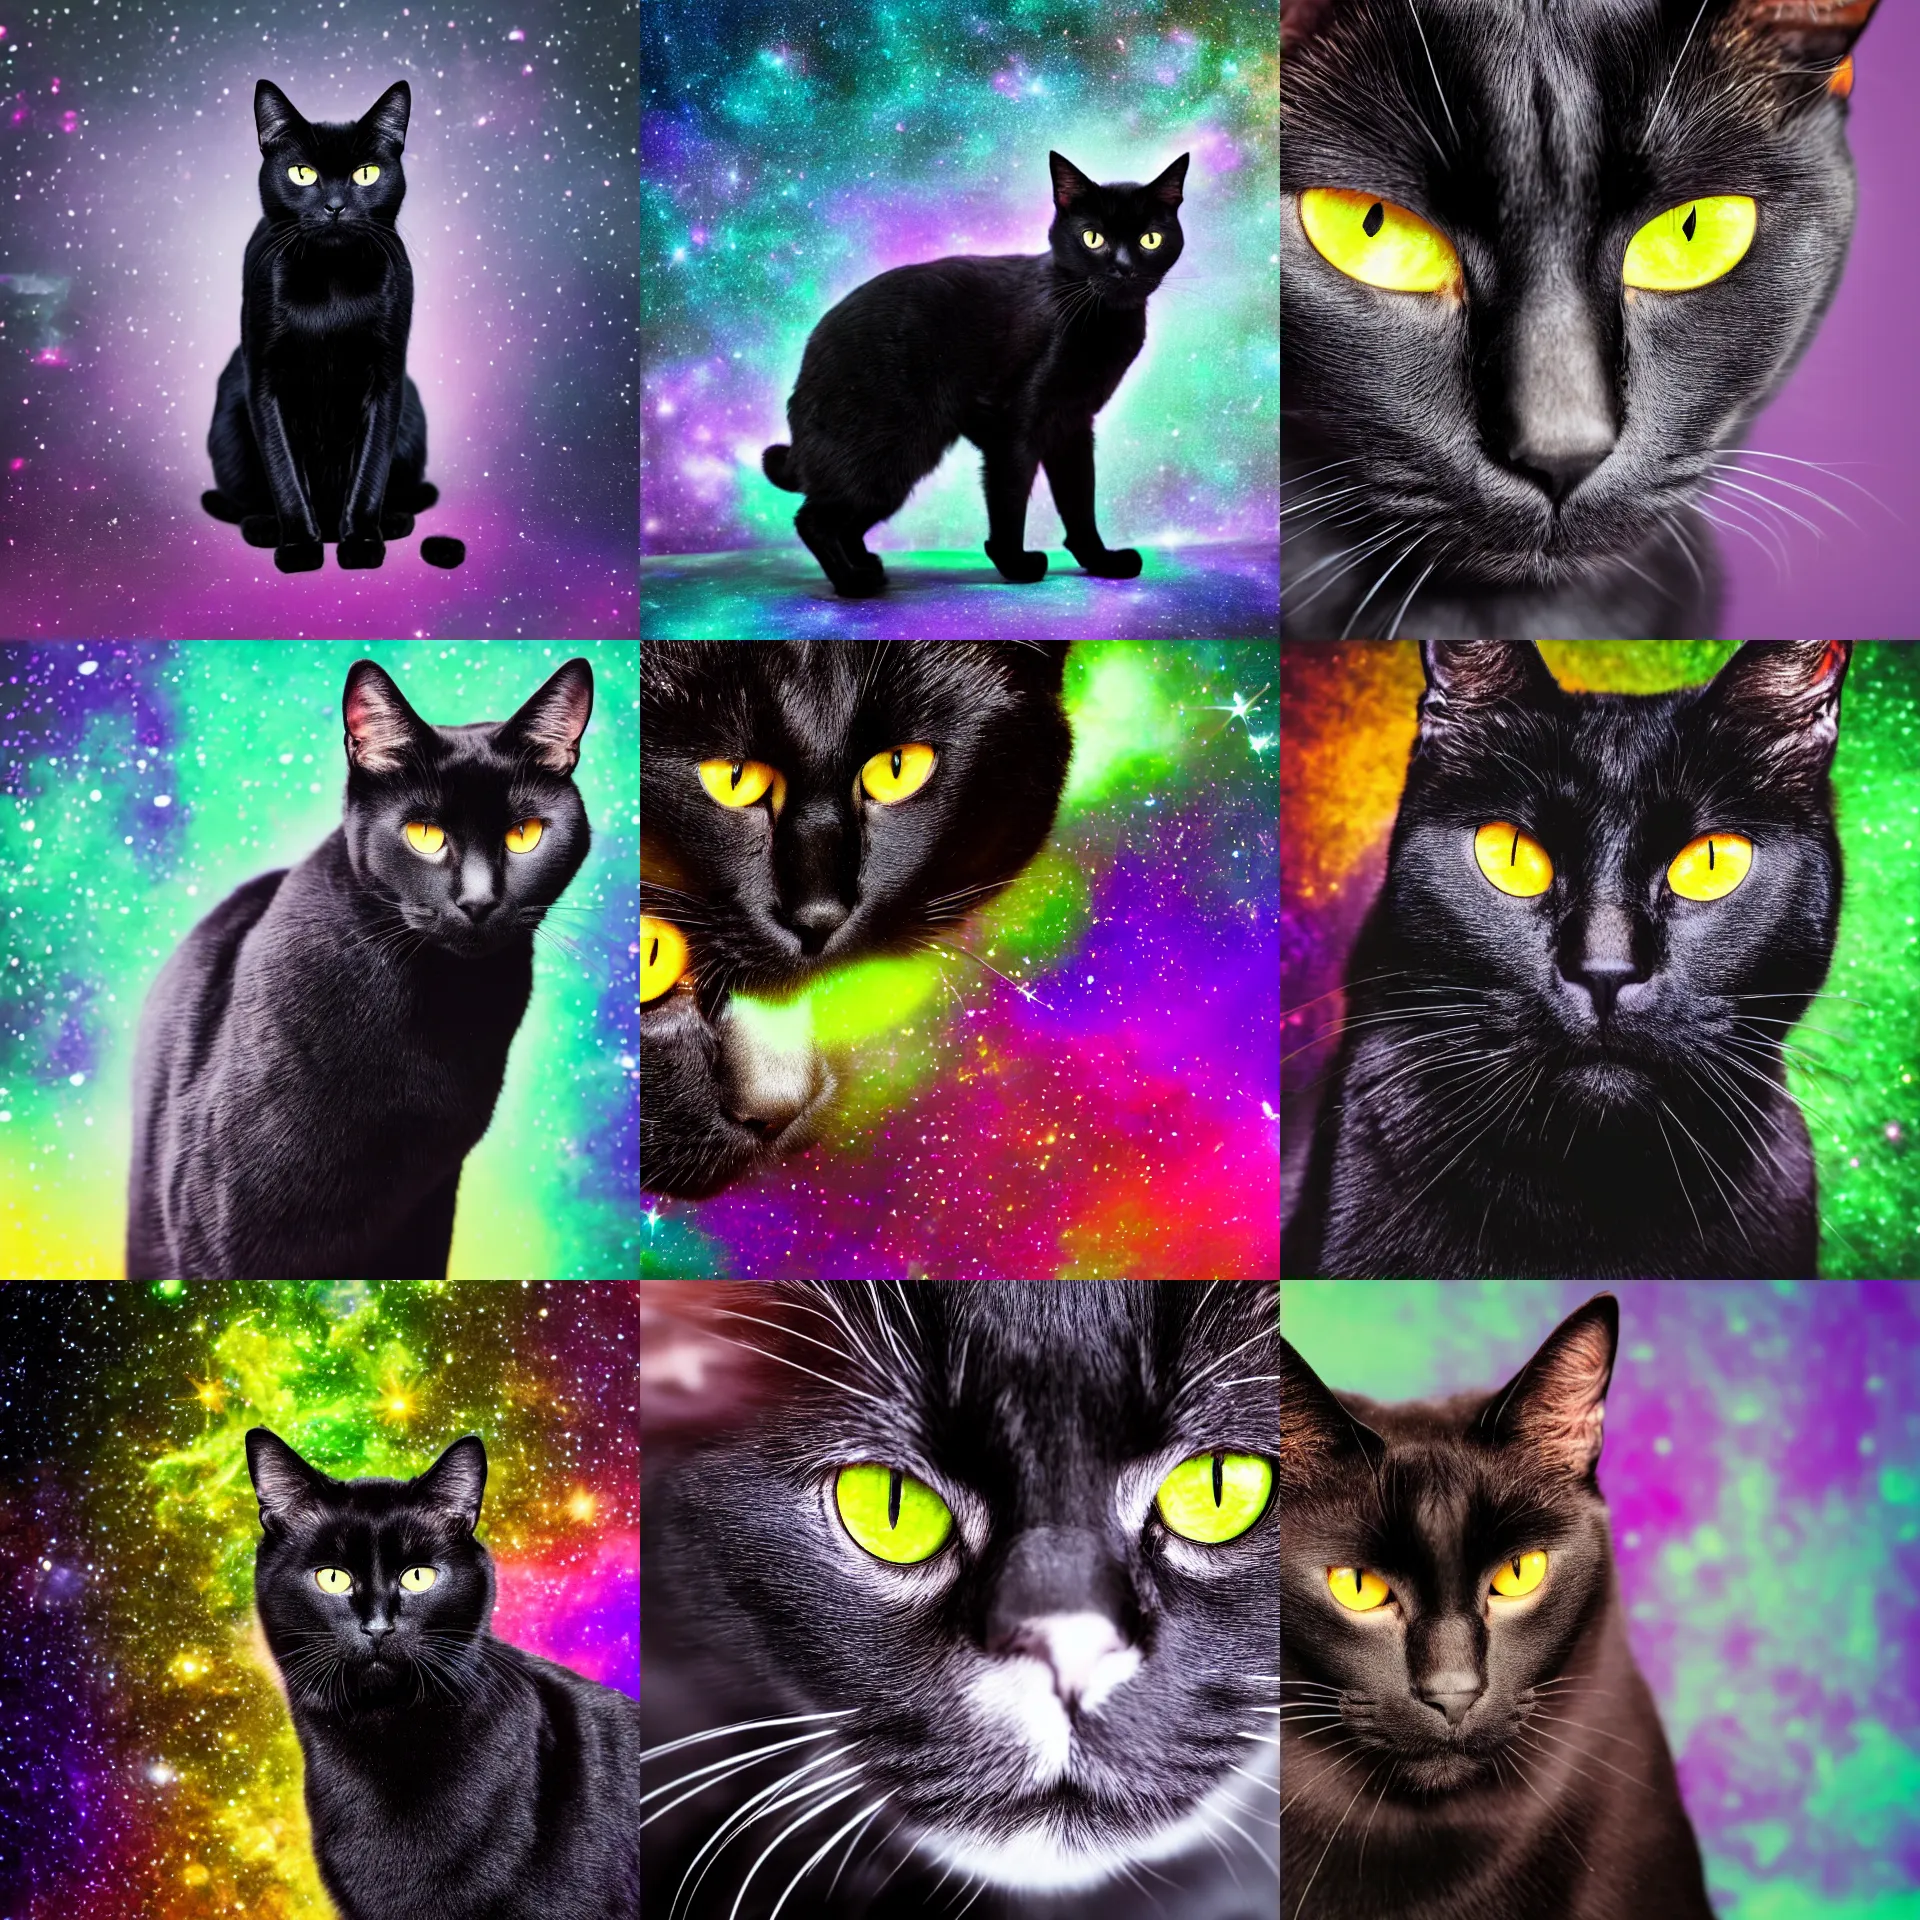 Prompt: full body photograph of a black cat with yellow eyes staring at you, green and purple studio lighting, on a galaxy looking background